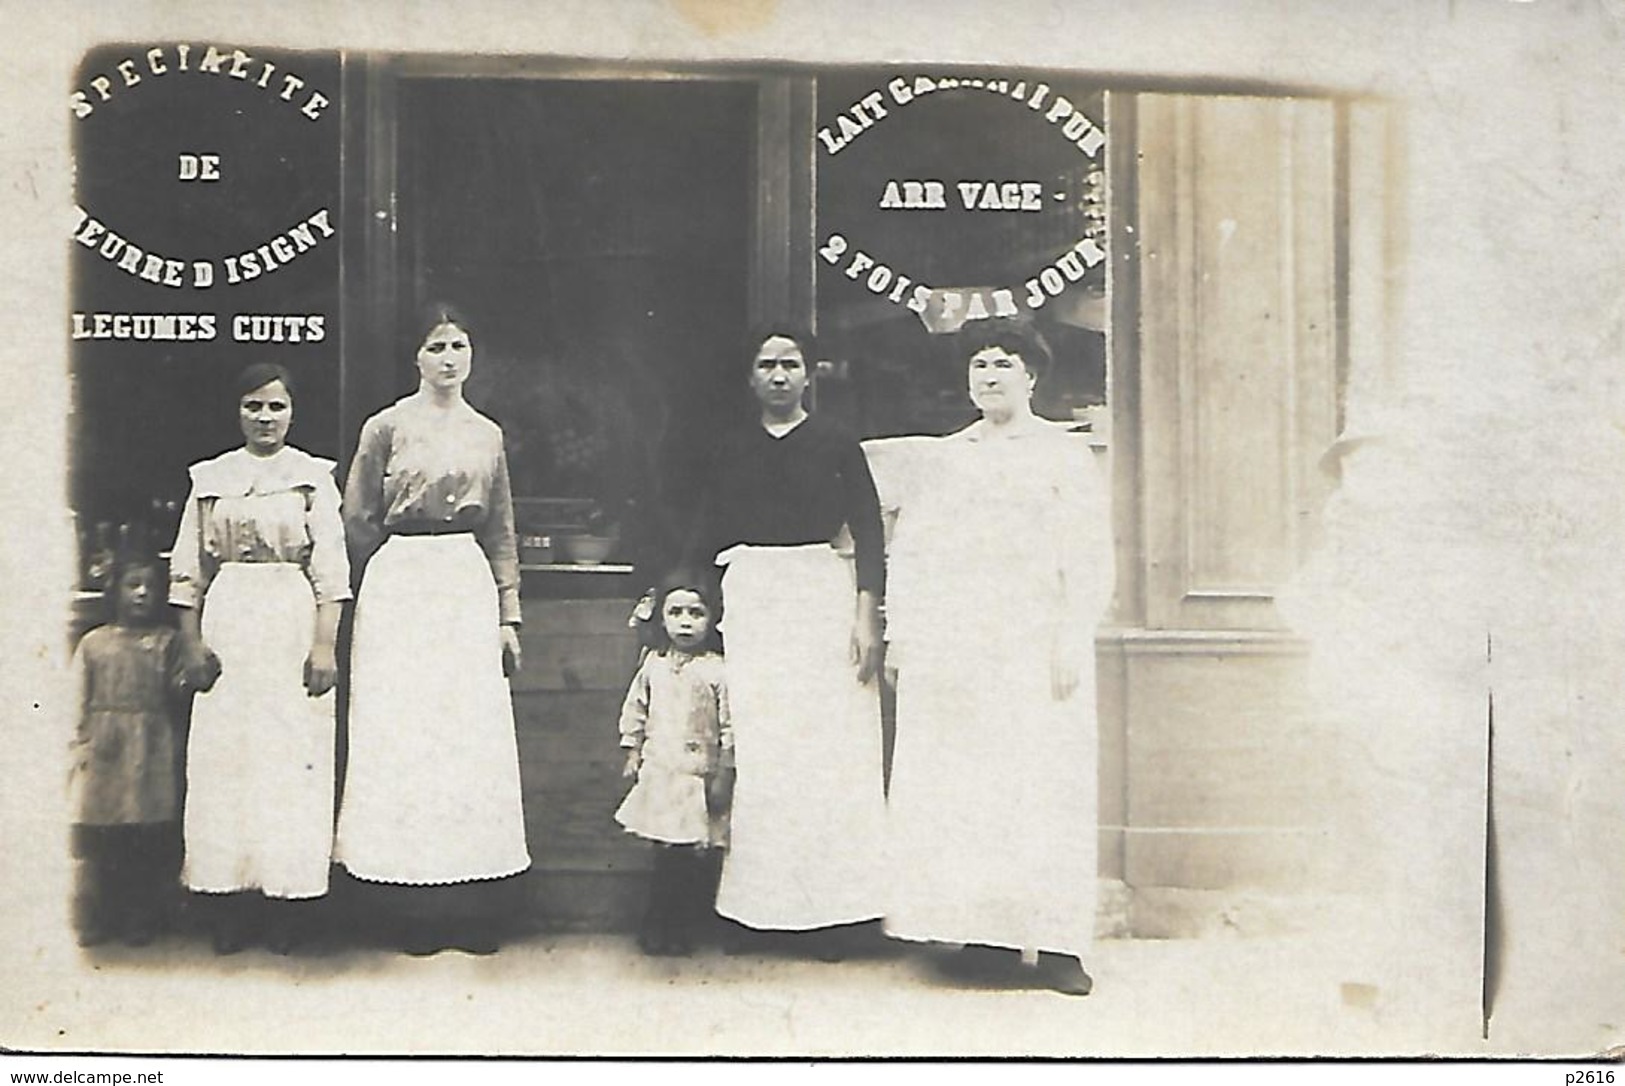 A IDENTIFIER -  CARTE POSTALE PHOTO -  MAGASIN -  SPECIALITE DE BEURRE D ISIGNY - To Identify